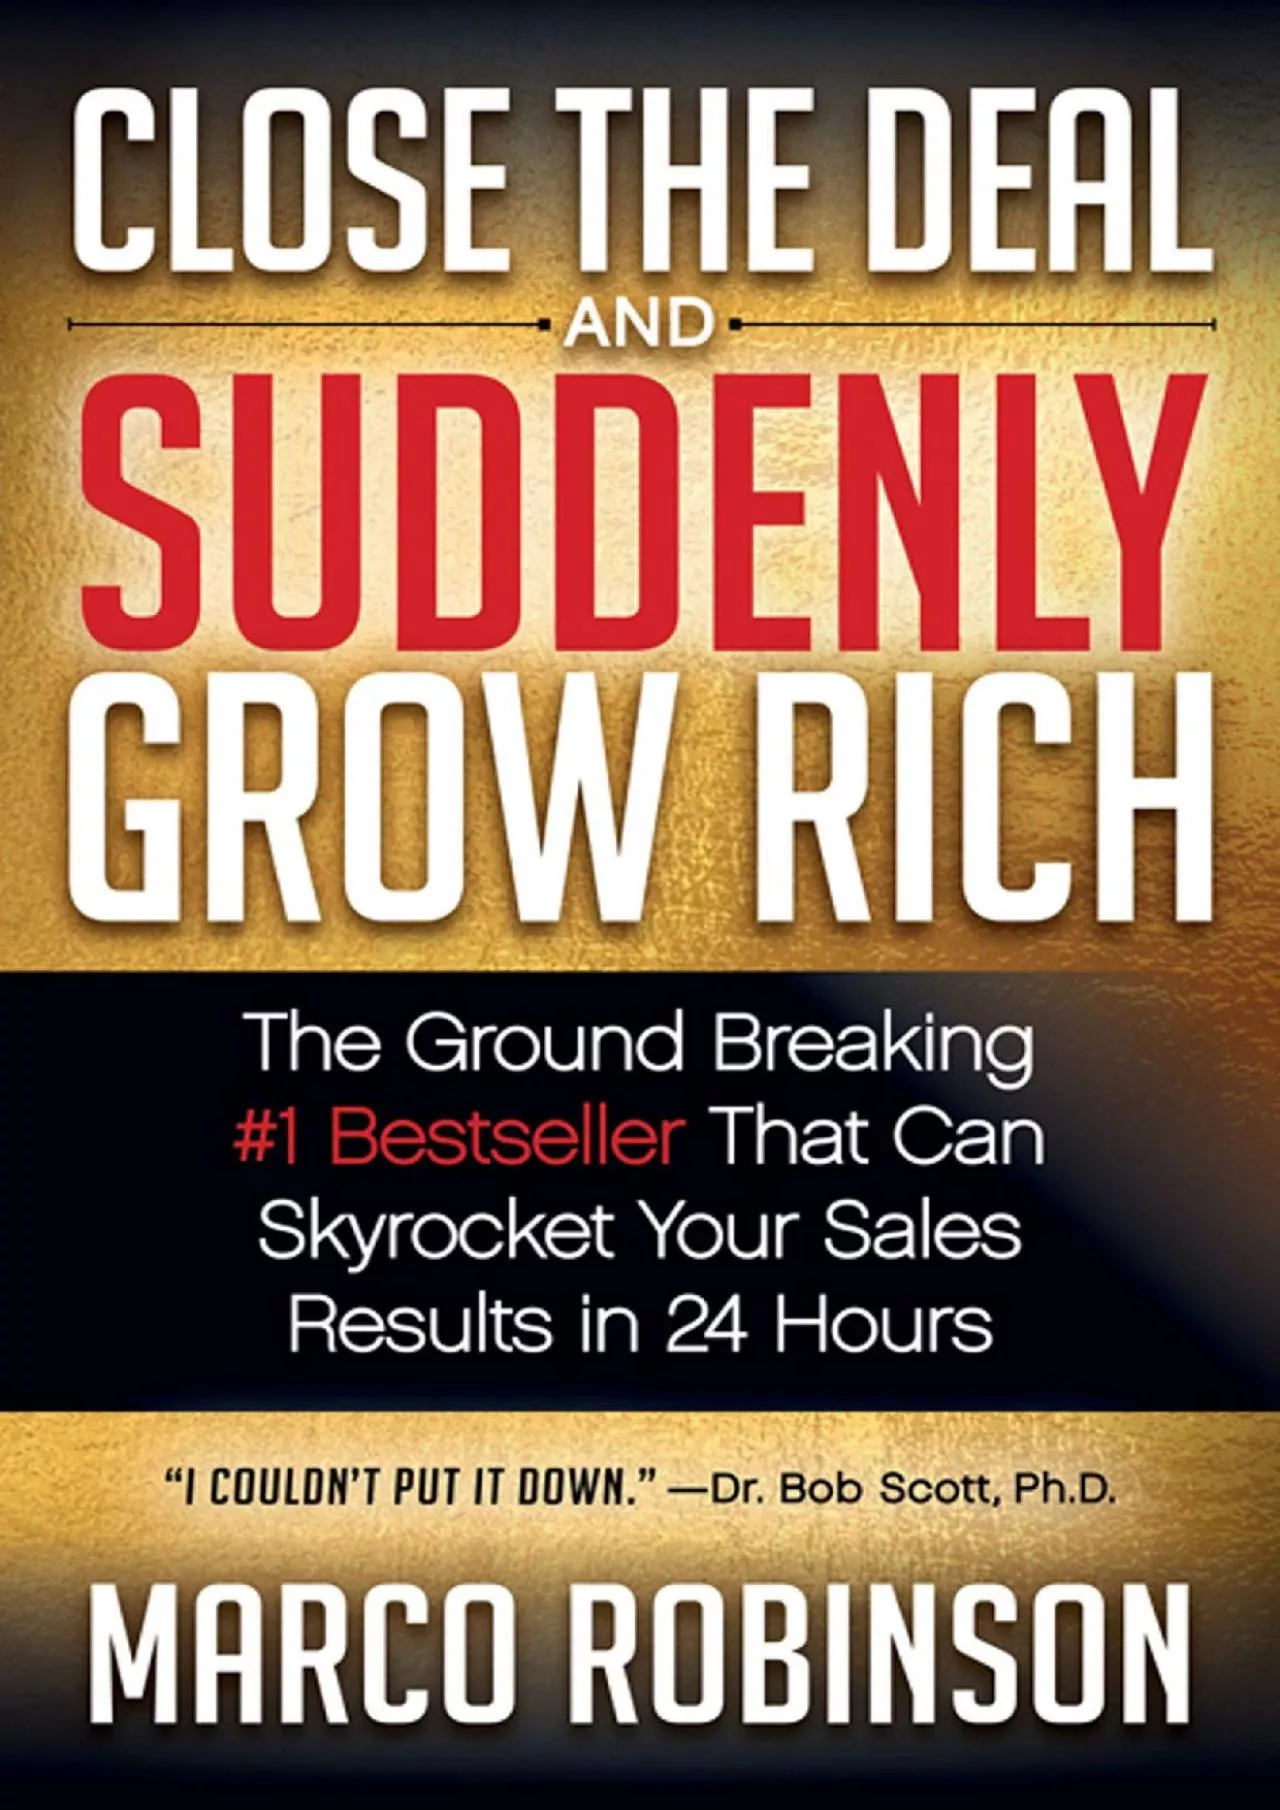 Close the Deal and Suddenly Grow Rich: The Ground Breaking 1 Bestseller That Can Skyrocket